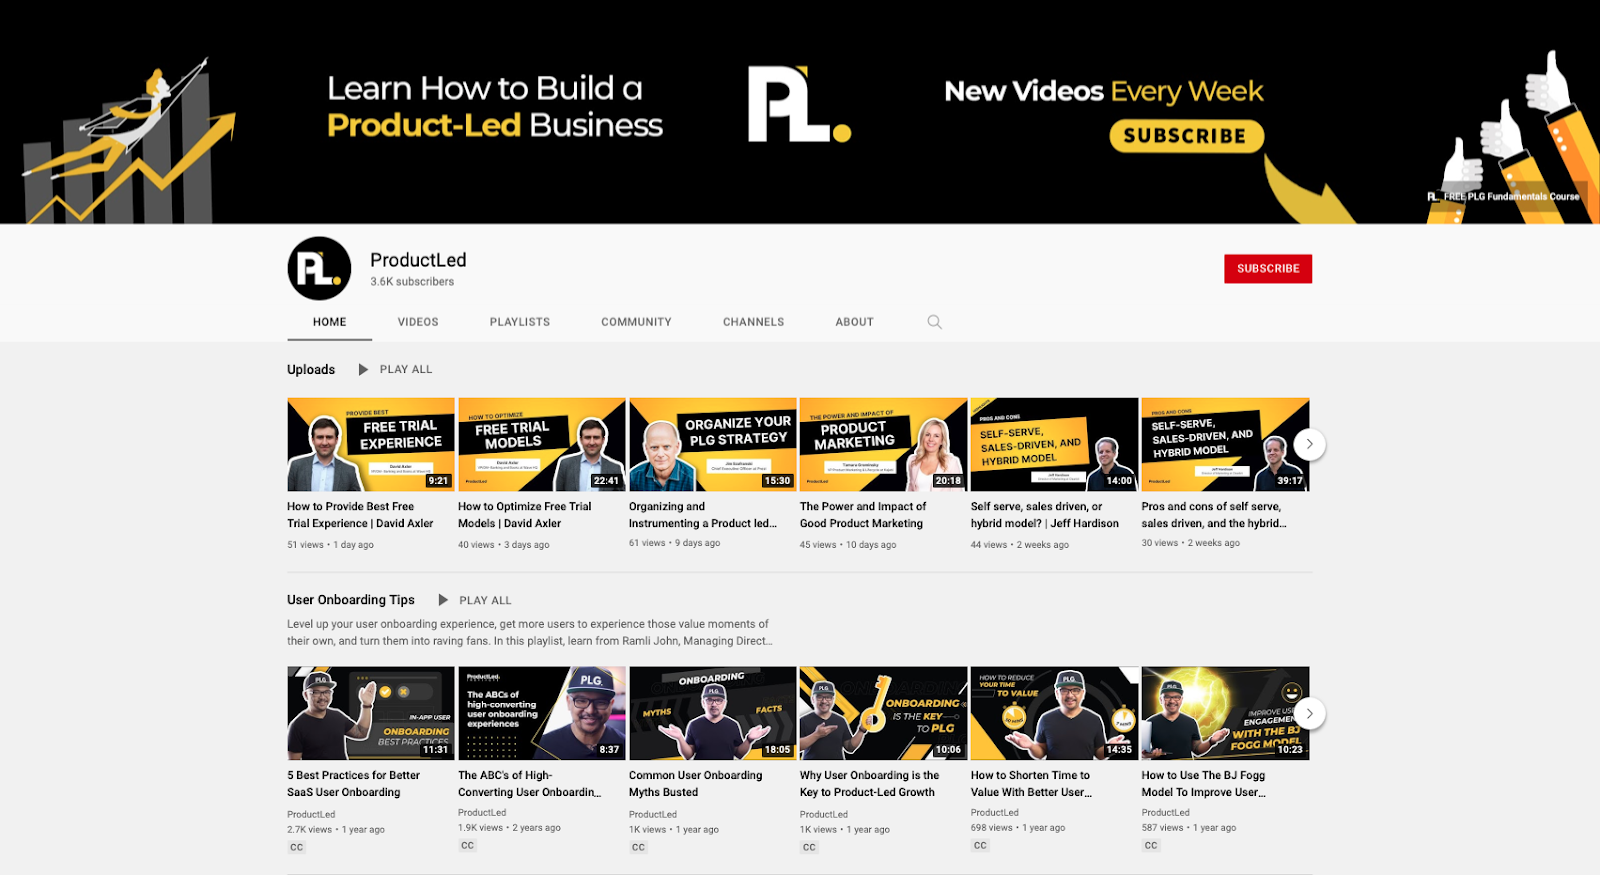 ProductLed releases new product-led growth informative YouTube videos weekly as a form of content marketing.